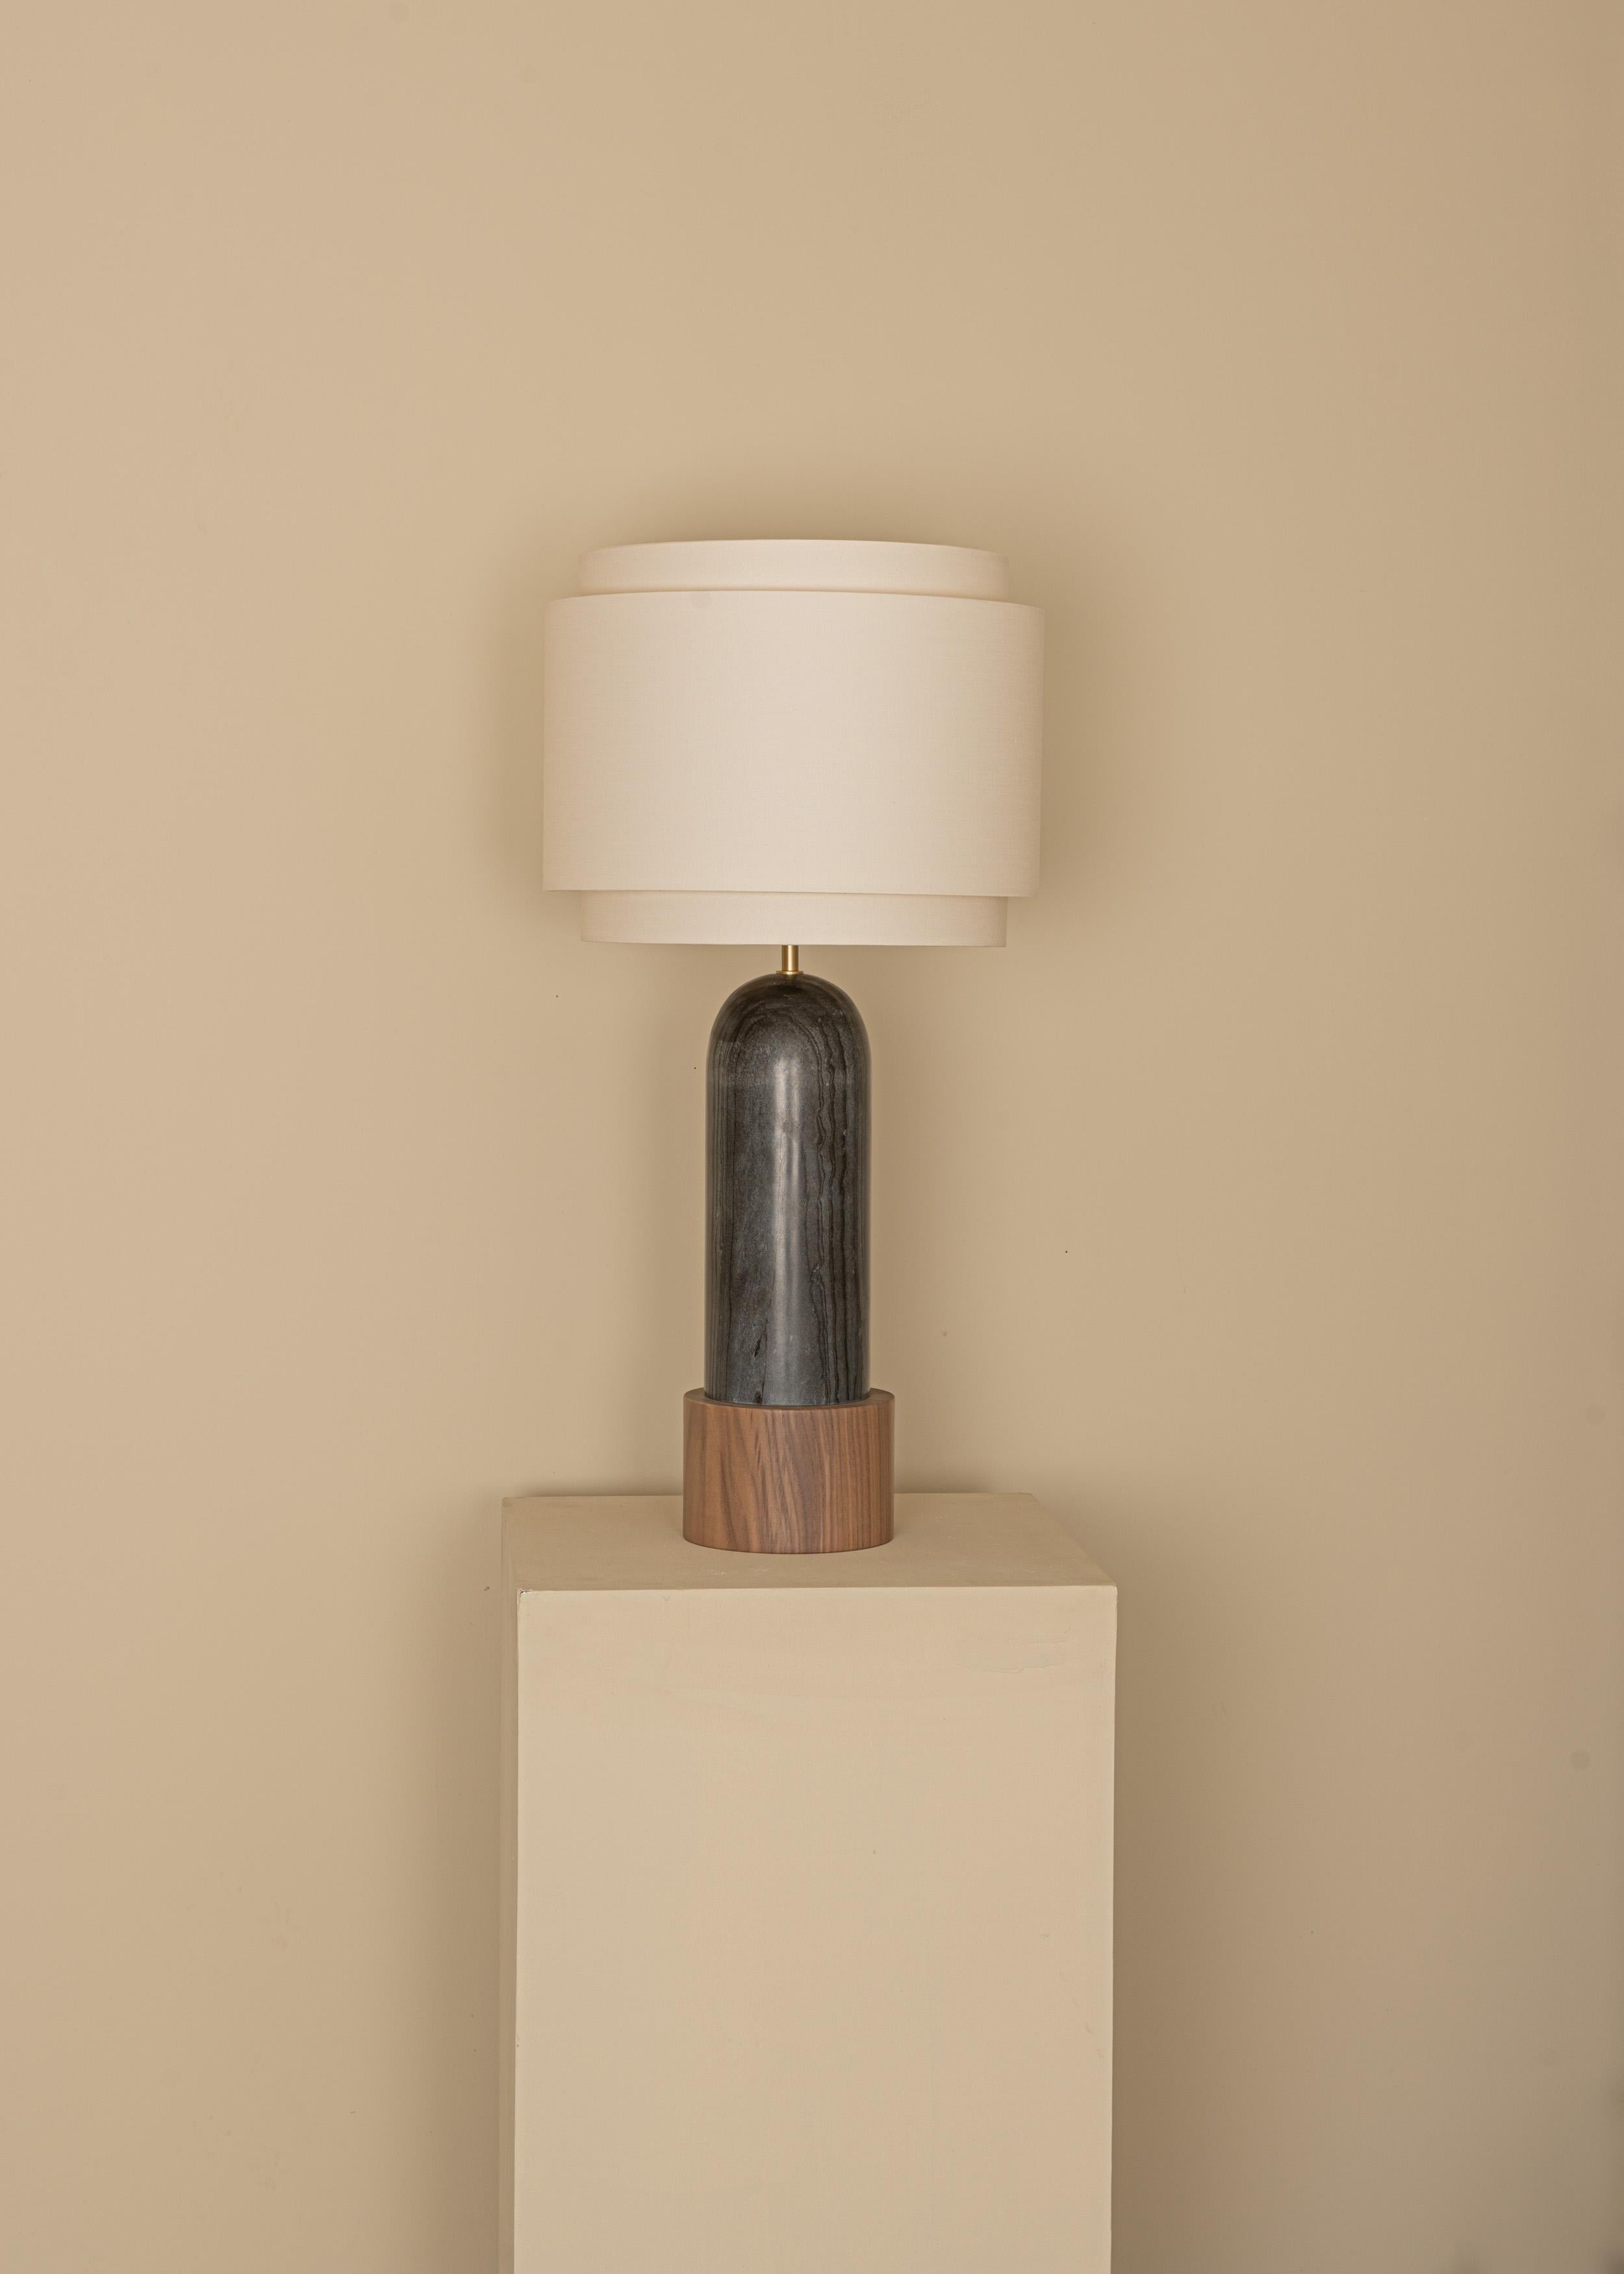 Black Marble And Walnut Base Pura Kelo Double Table Lamp by Simone & Marcel
Dimensions: D 35 x W 35 x H 69 cm.
Materials: Brass, cotton, walnut and black marble.

Also available in different marble, wood and alabaster options and finishes. Custom